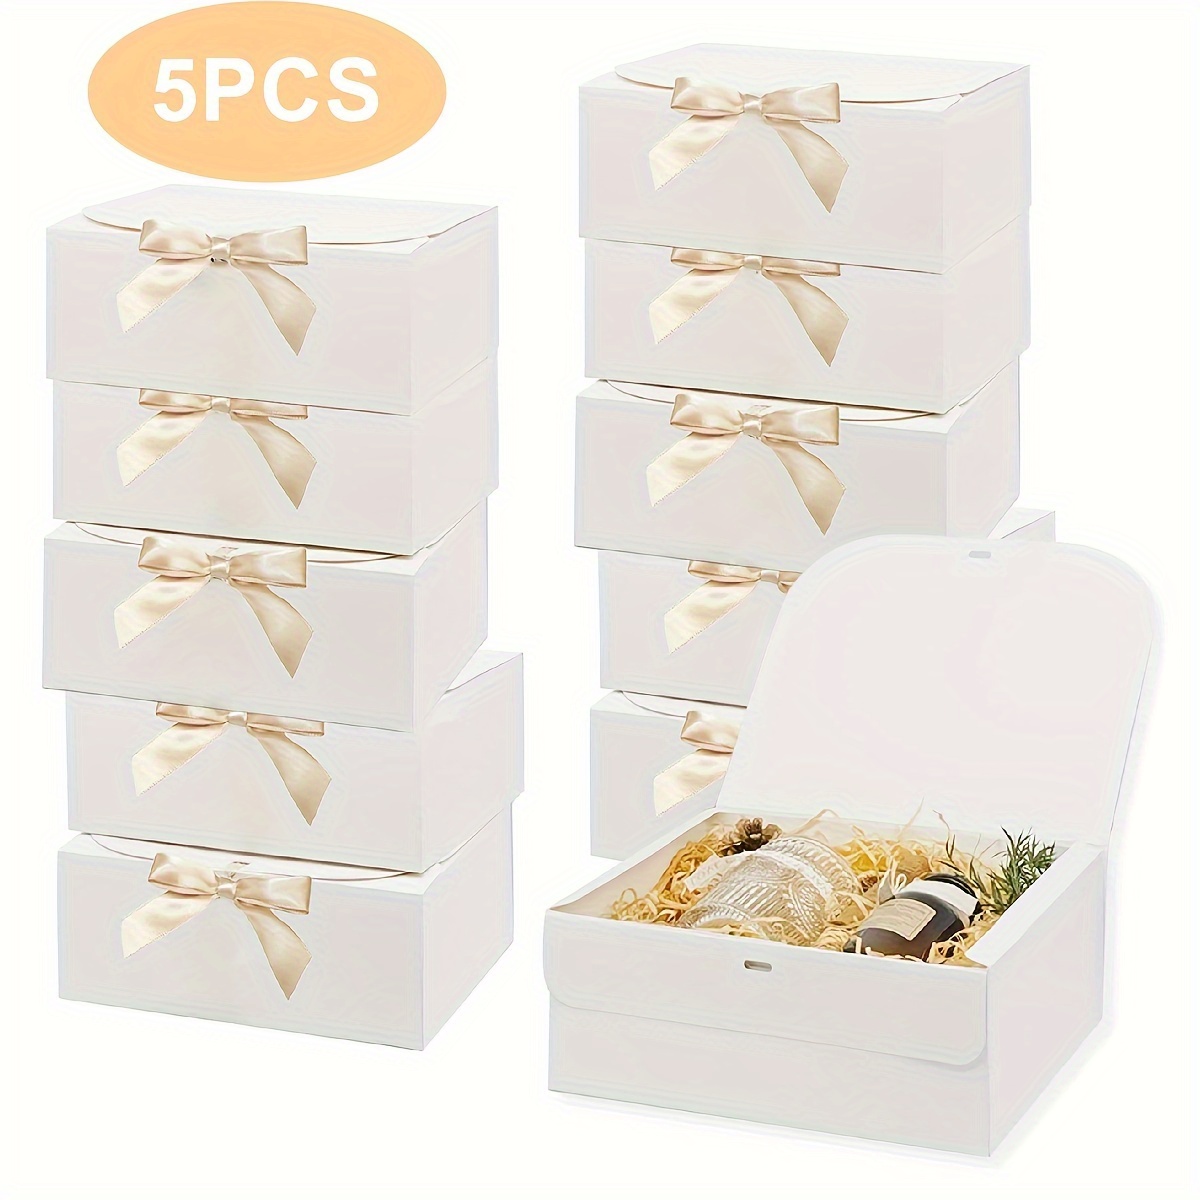 

5pcs White Large Gift Boxes With Ribbon - Multipurpose Paper Packing Box For Jewelry Display, Storage & Packaging - Ideal For Wedding Favor, Birthday & Holiday Presents - No Power Required